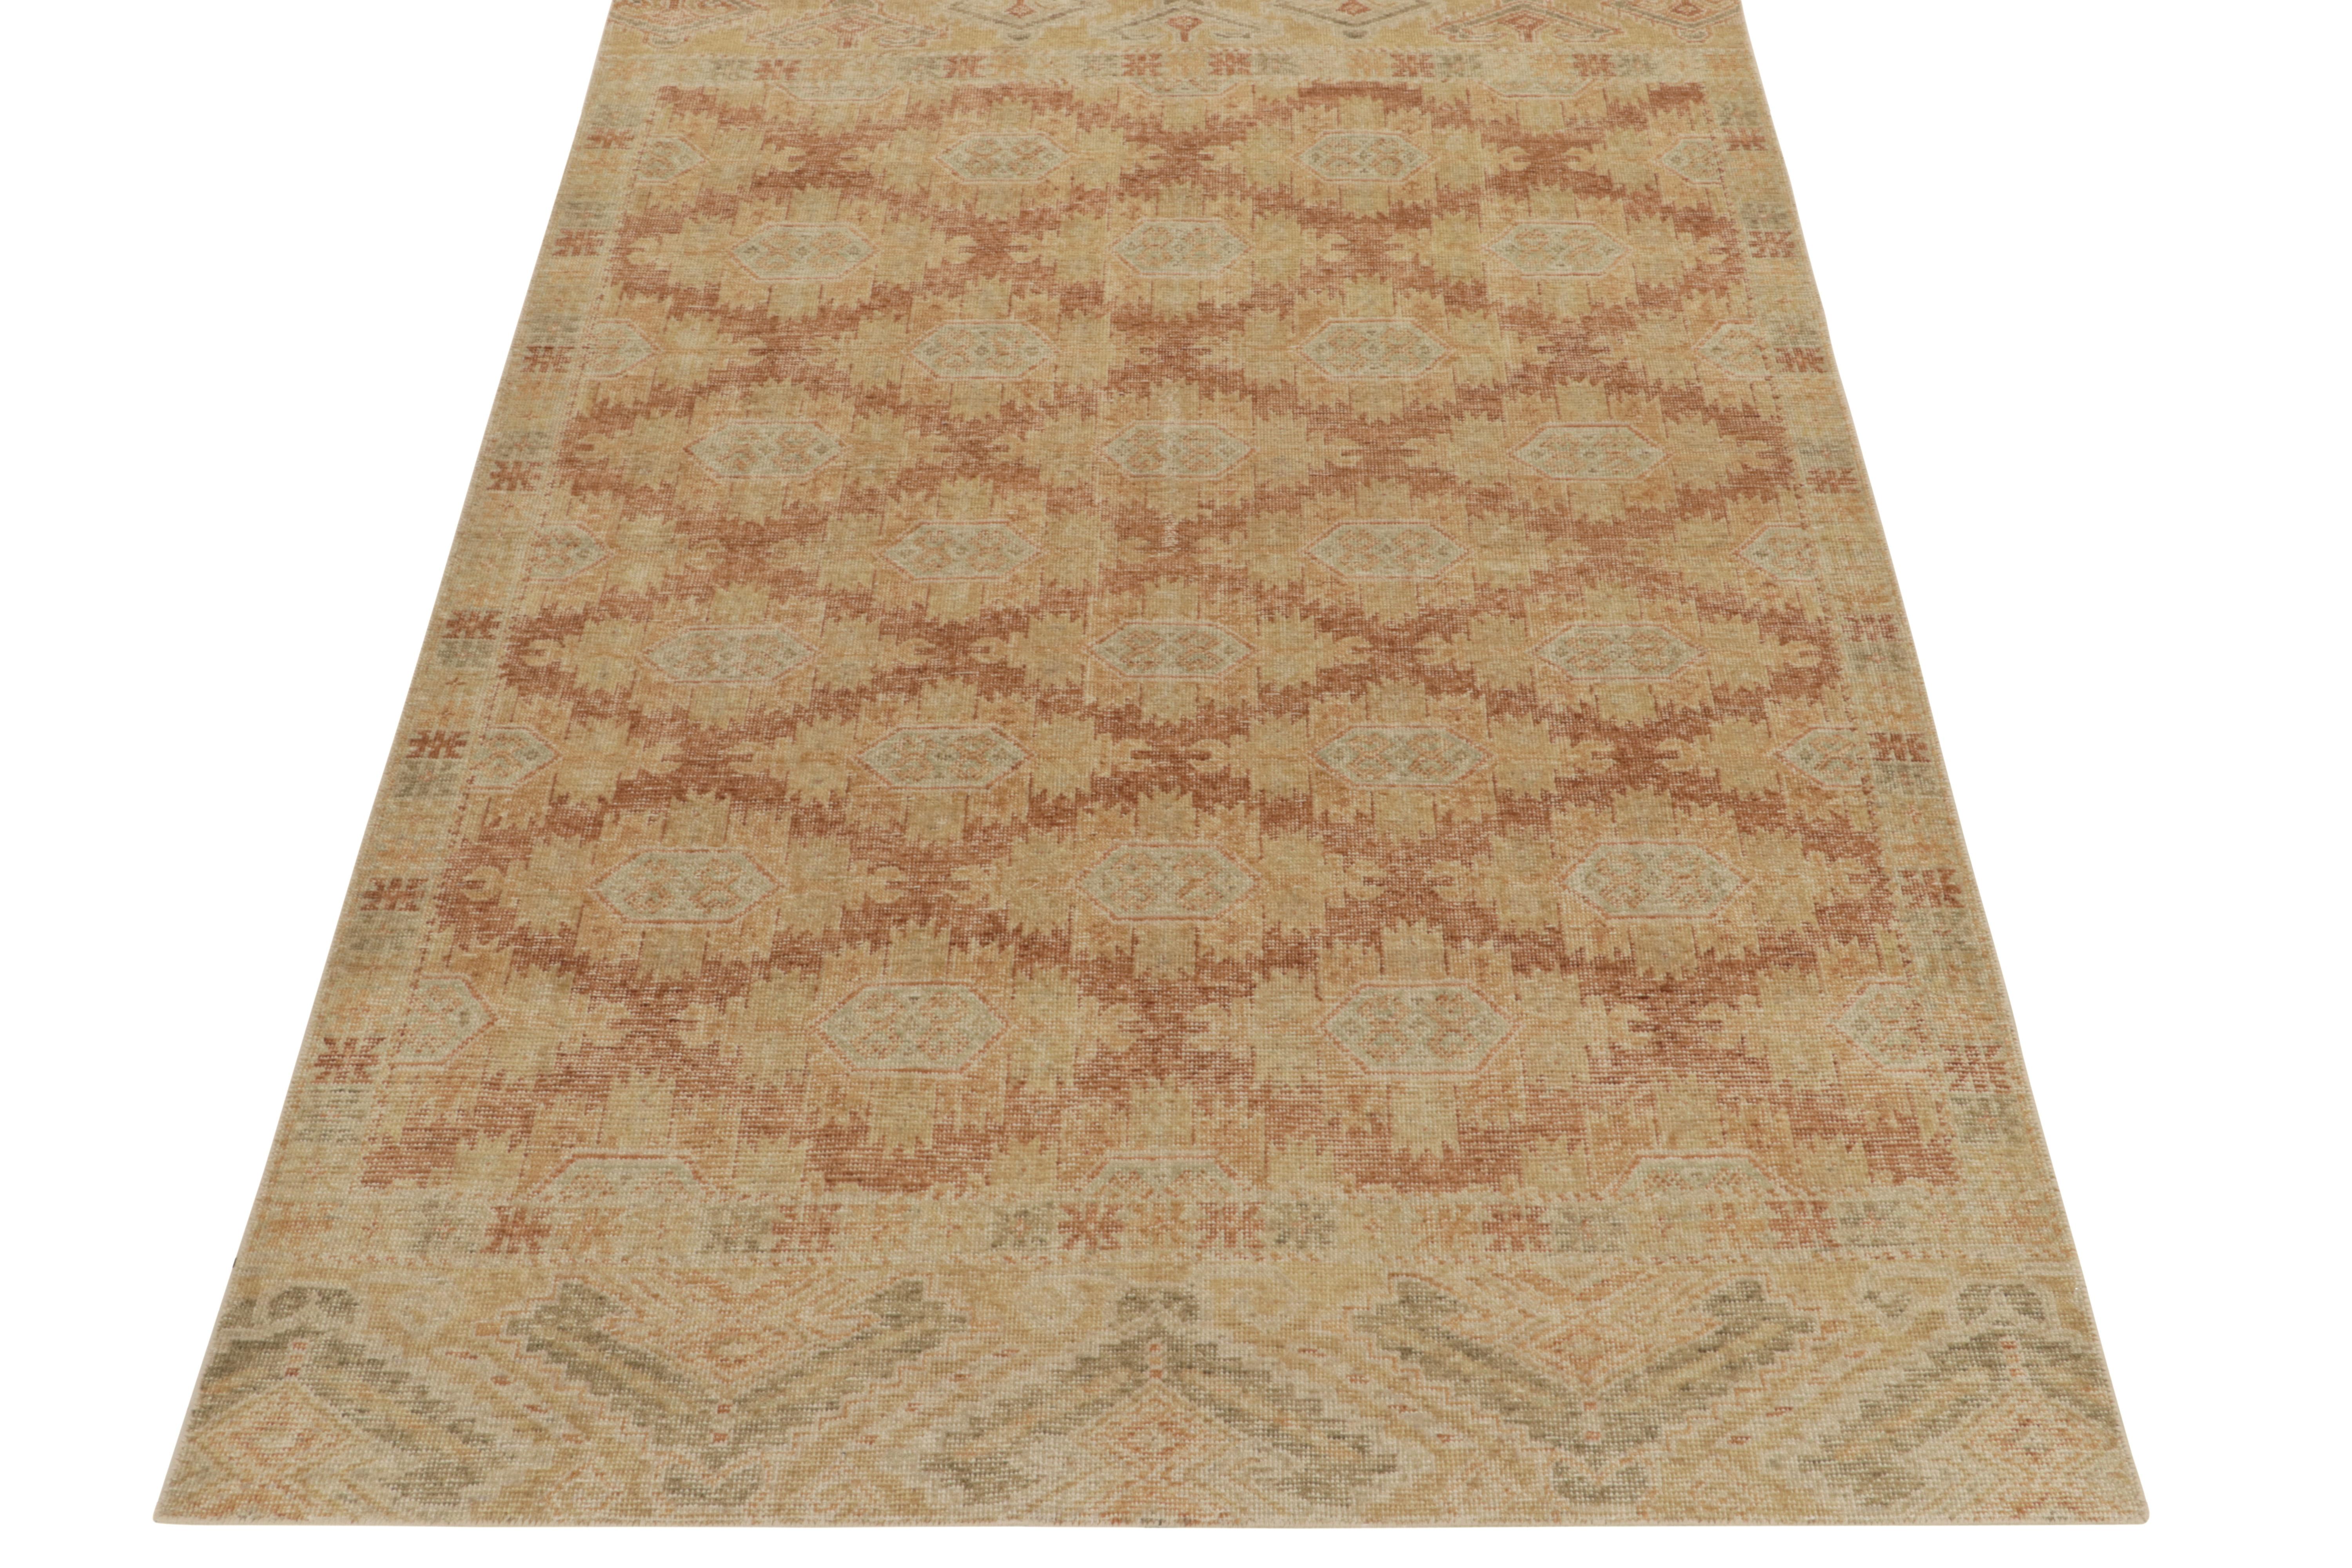 A 6x9 distressed style rug from Rug & Kilim’s Homage collection enjoying a montage of geometric patterns & tribal motifs. Hand-knotted in texturally fine, low-height wool pile, the vision enjoys a visually arresting appeal with the traditional